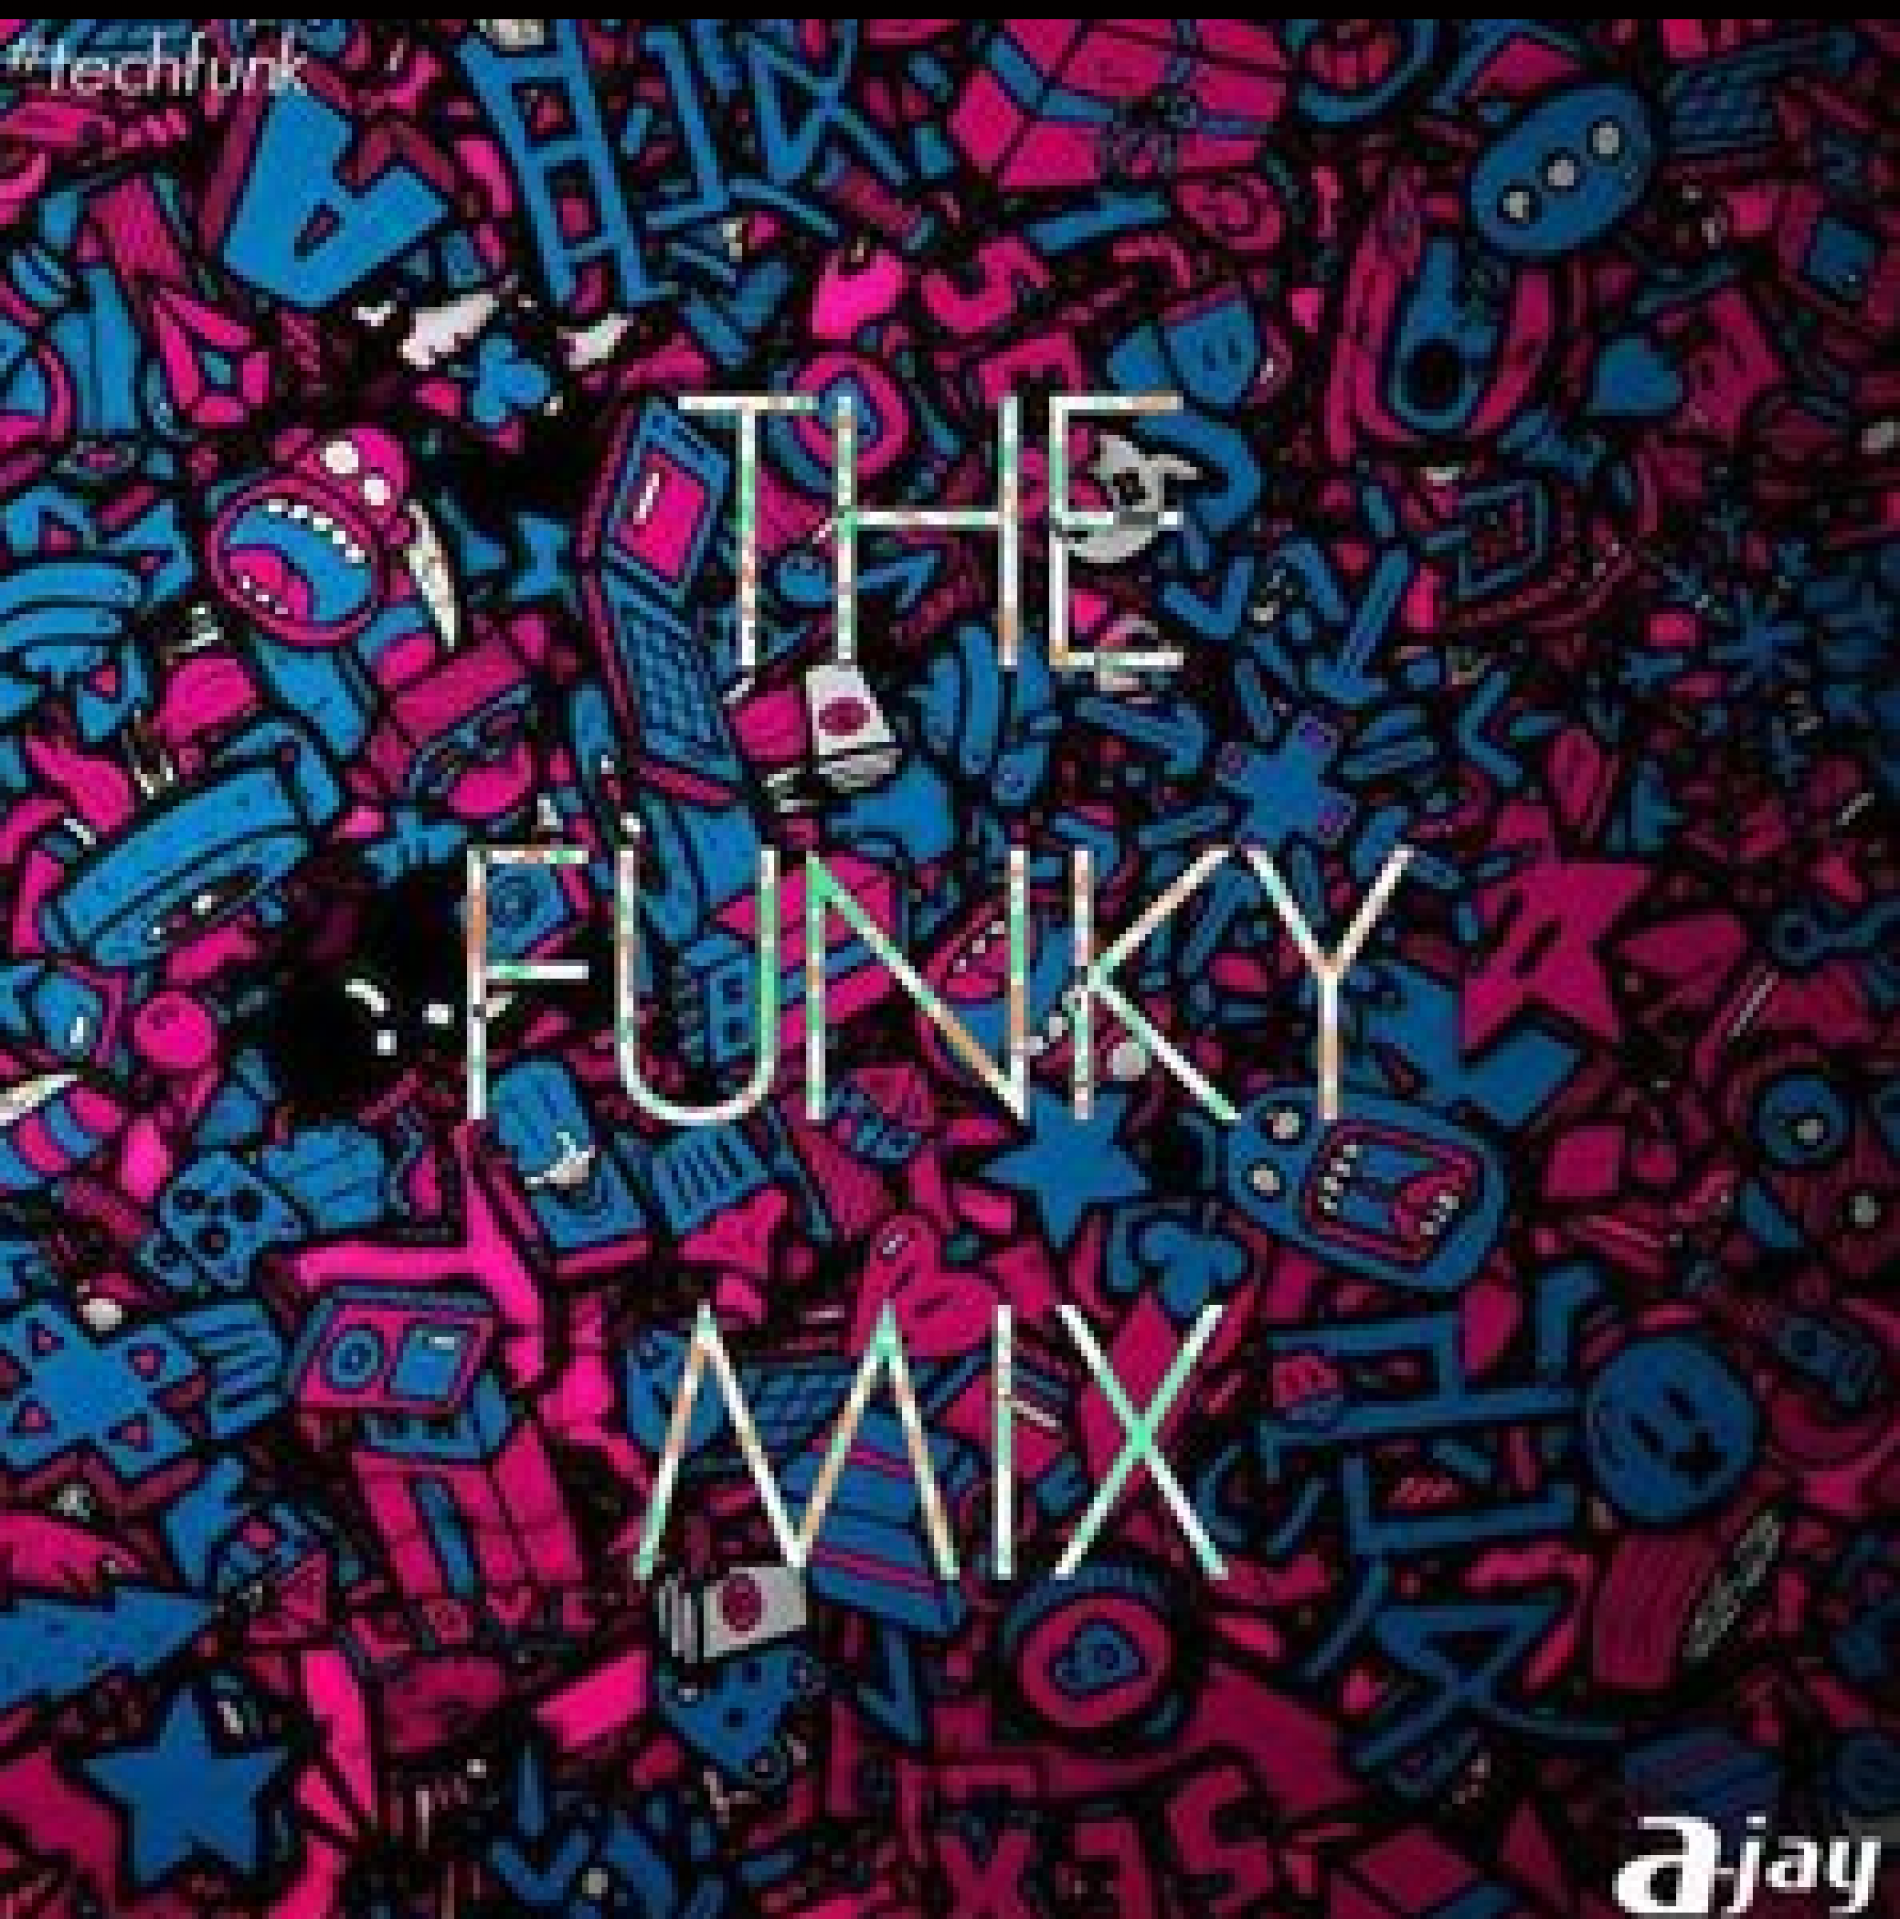 A-Jay: The Funky Mix